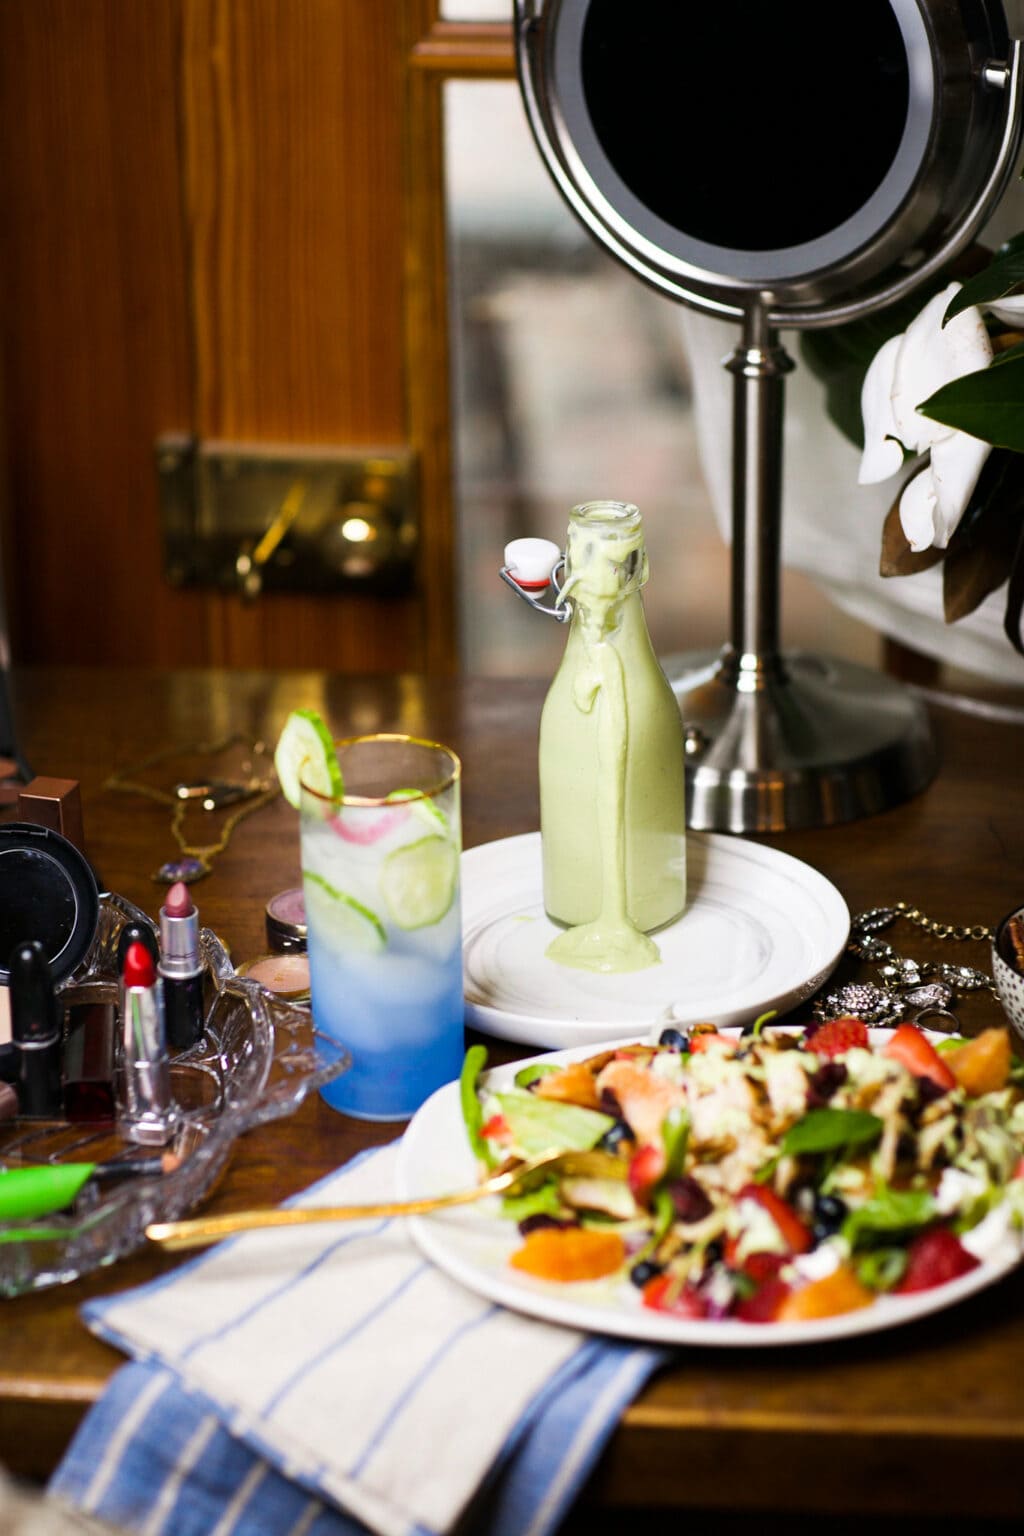 avocado dressing, green goddess style, in glass bottle behind white plate full of power salad with chicken and a blue beverage with ice. Salad is next to a tray with lipsticks.